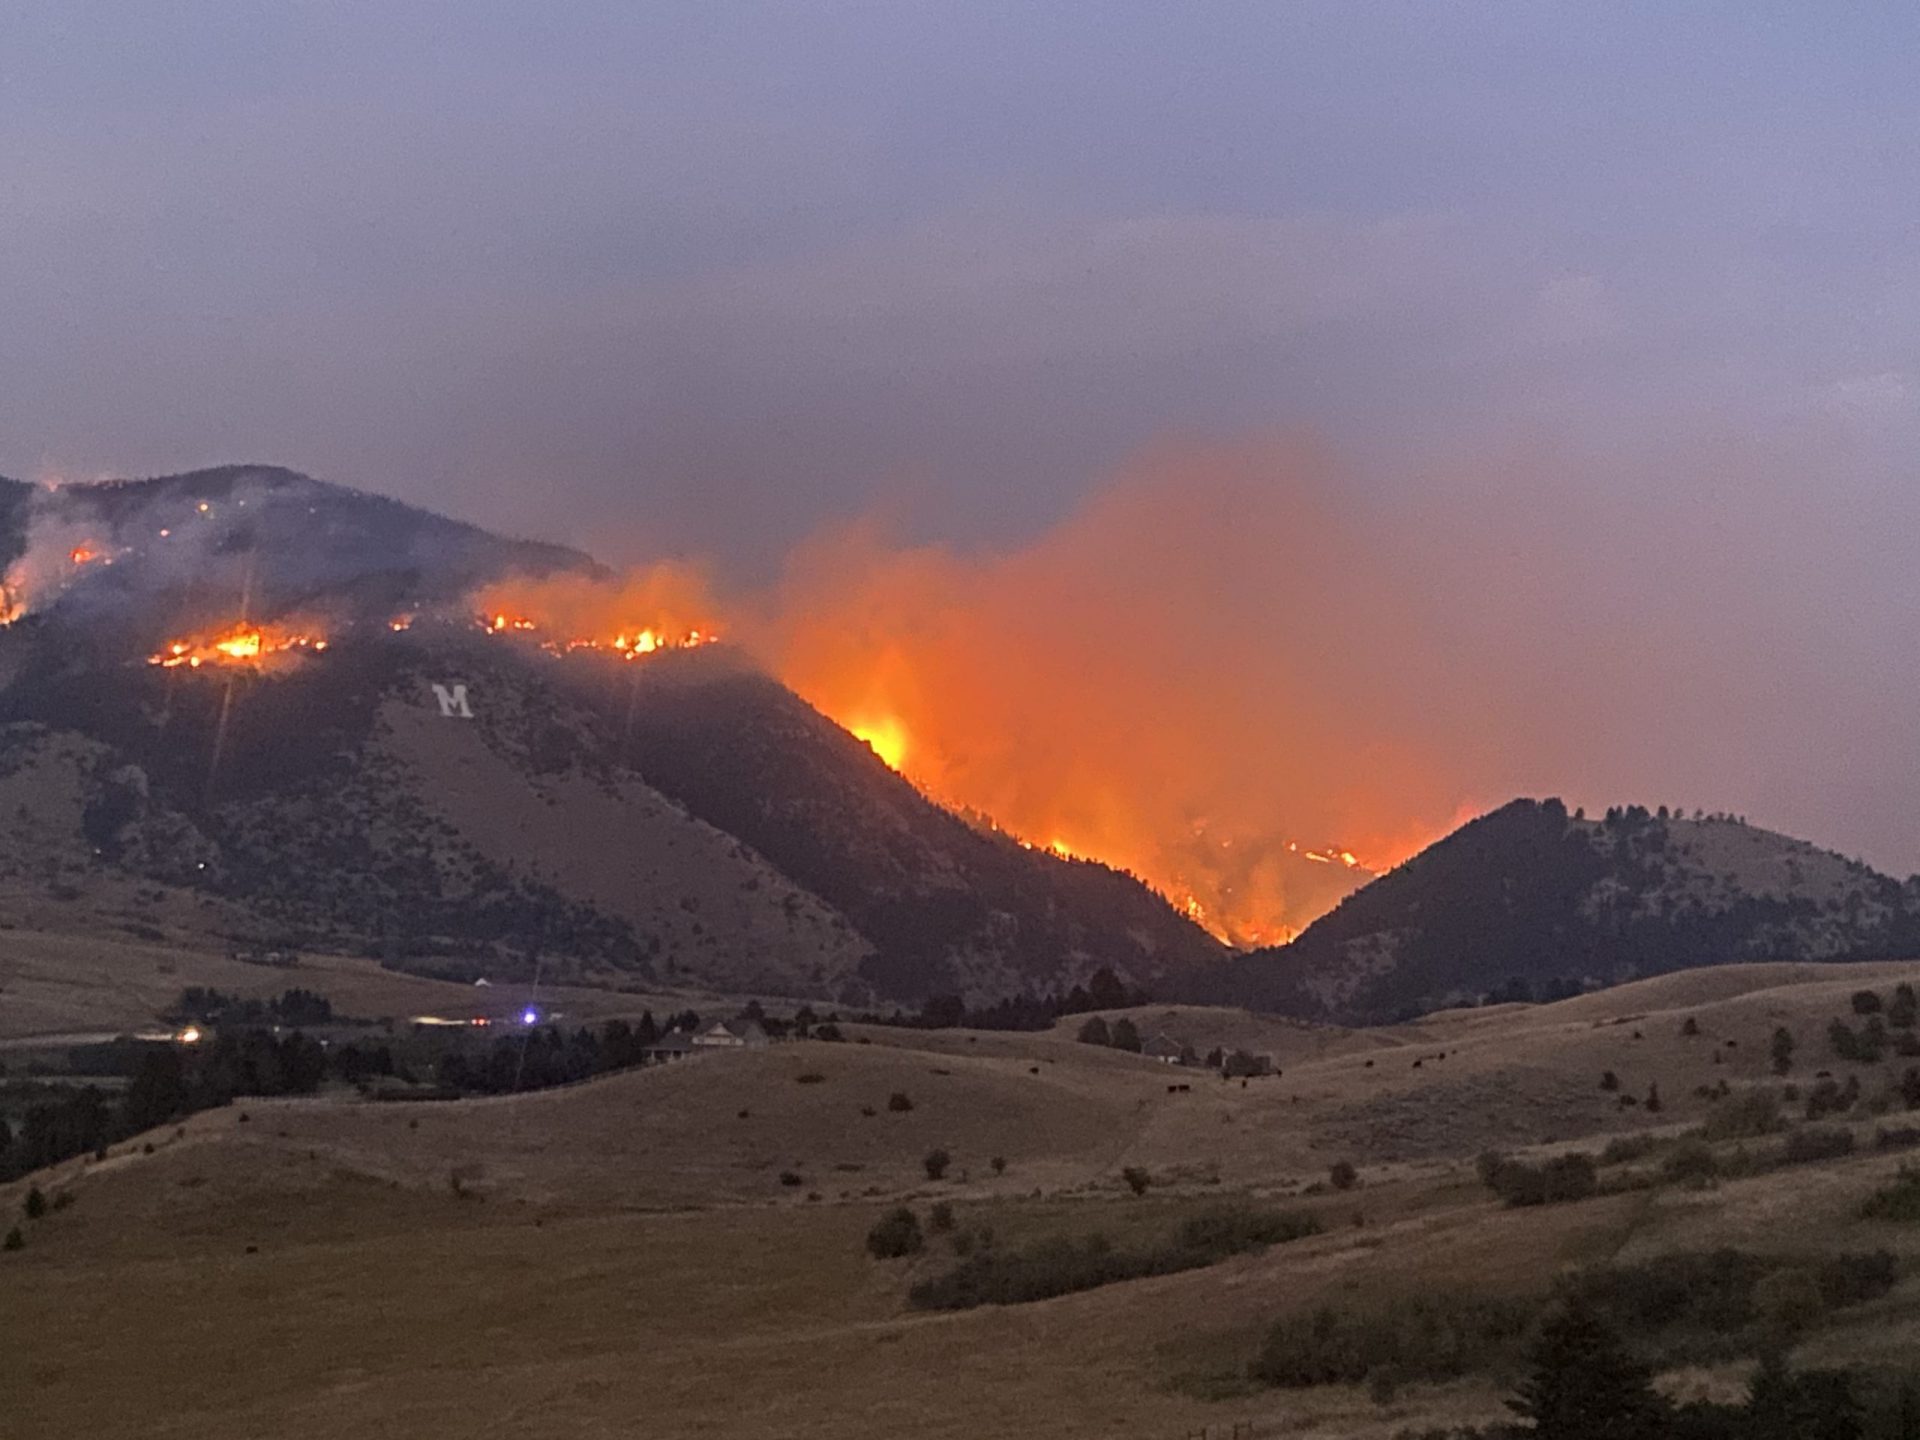 Bridger Foothills Fire Photo by Molly Ogle 2020